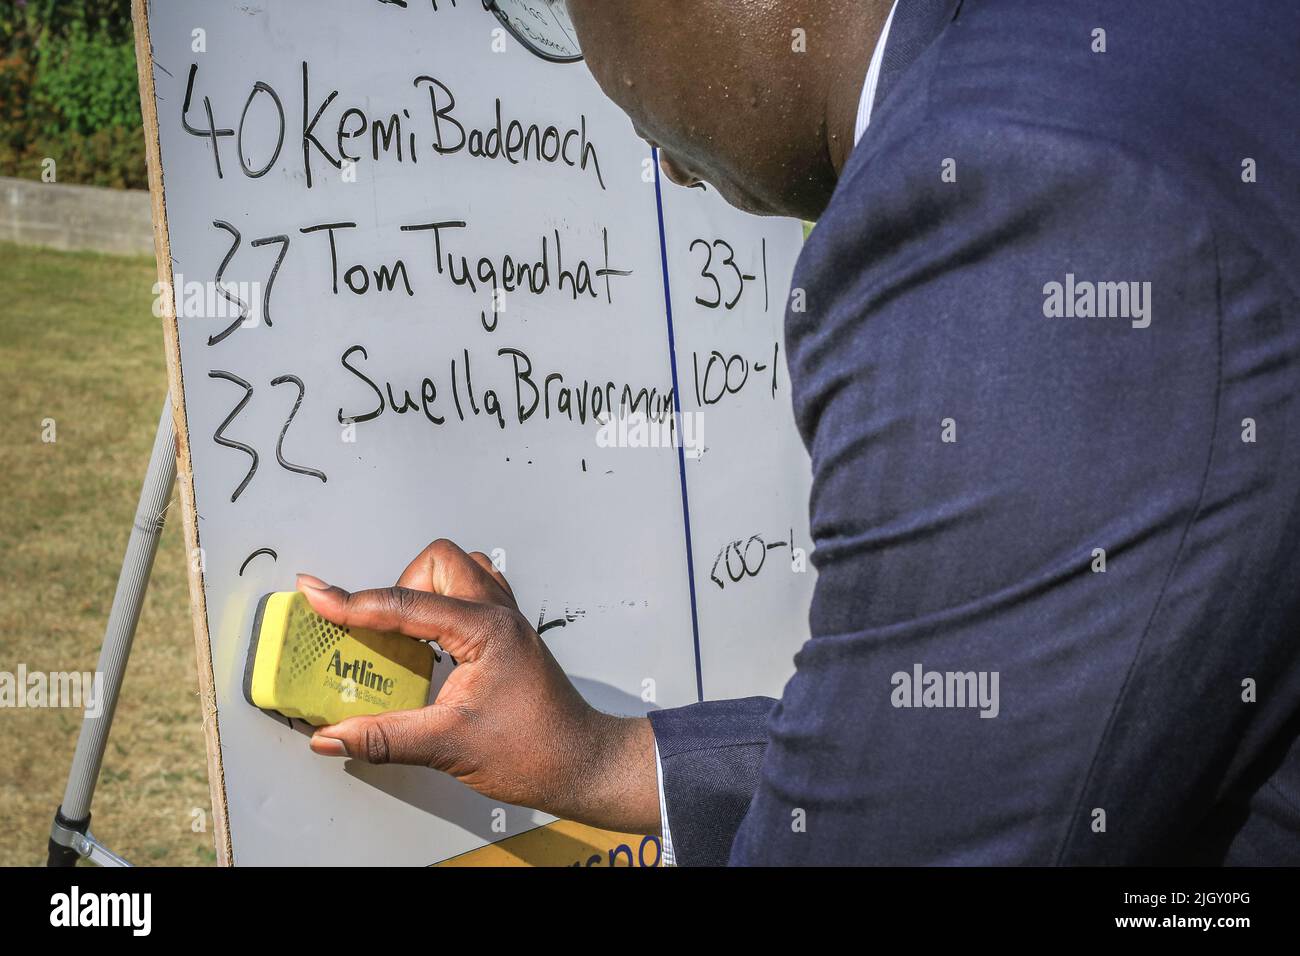 London, UK. 13th July, 2022. William Kedjanyi of Star Sports betting company wipes out the names of the two leadership contenders who have dropped out of the race, Nadhim Zahawi and Jeremy Hunt, following the first round knockout vote in Parliament by Conservative MPs. His tote board showing the odds for leadership candidates in the race. Credit: Imageplotter/Alamy Live News Stock Photo